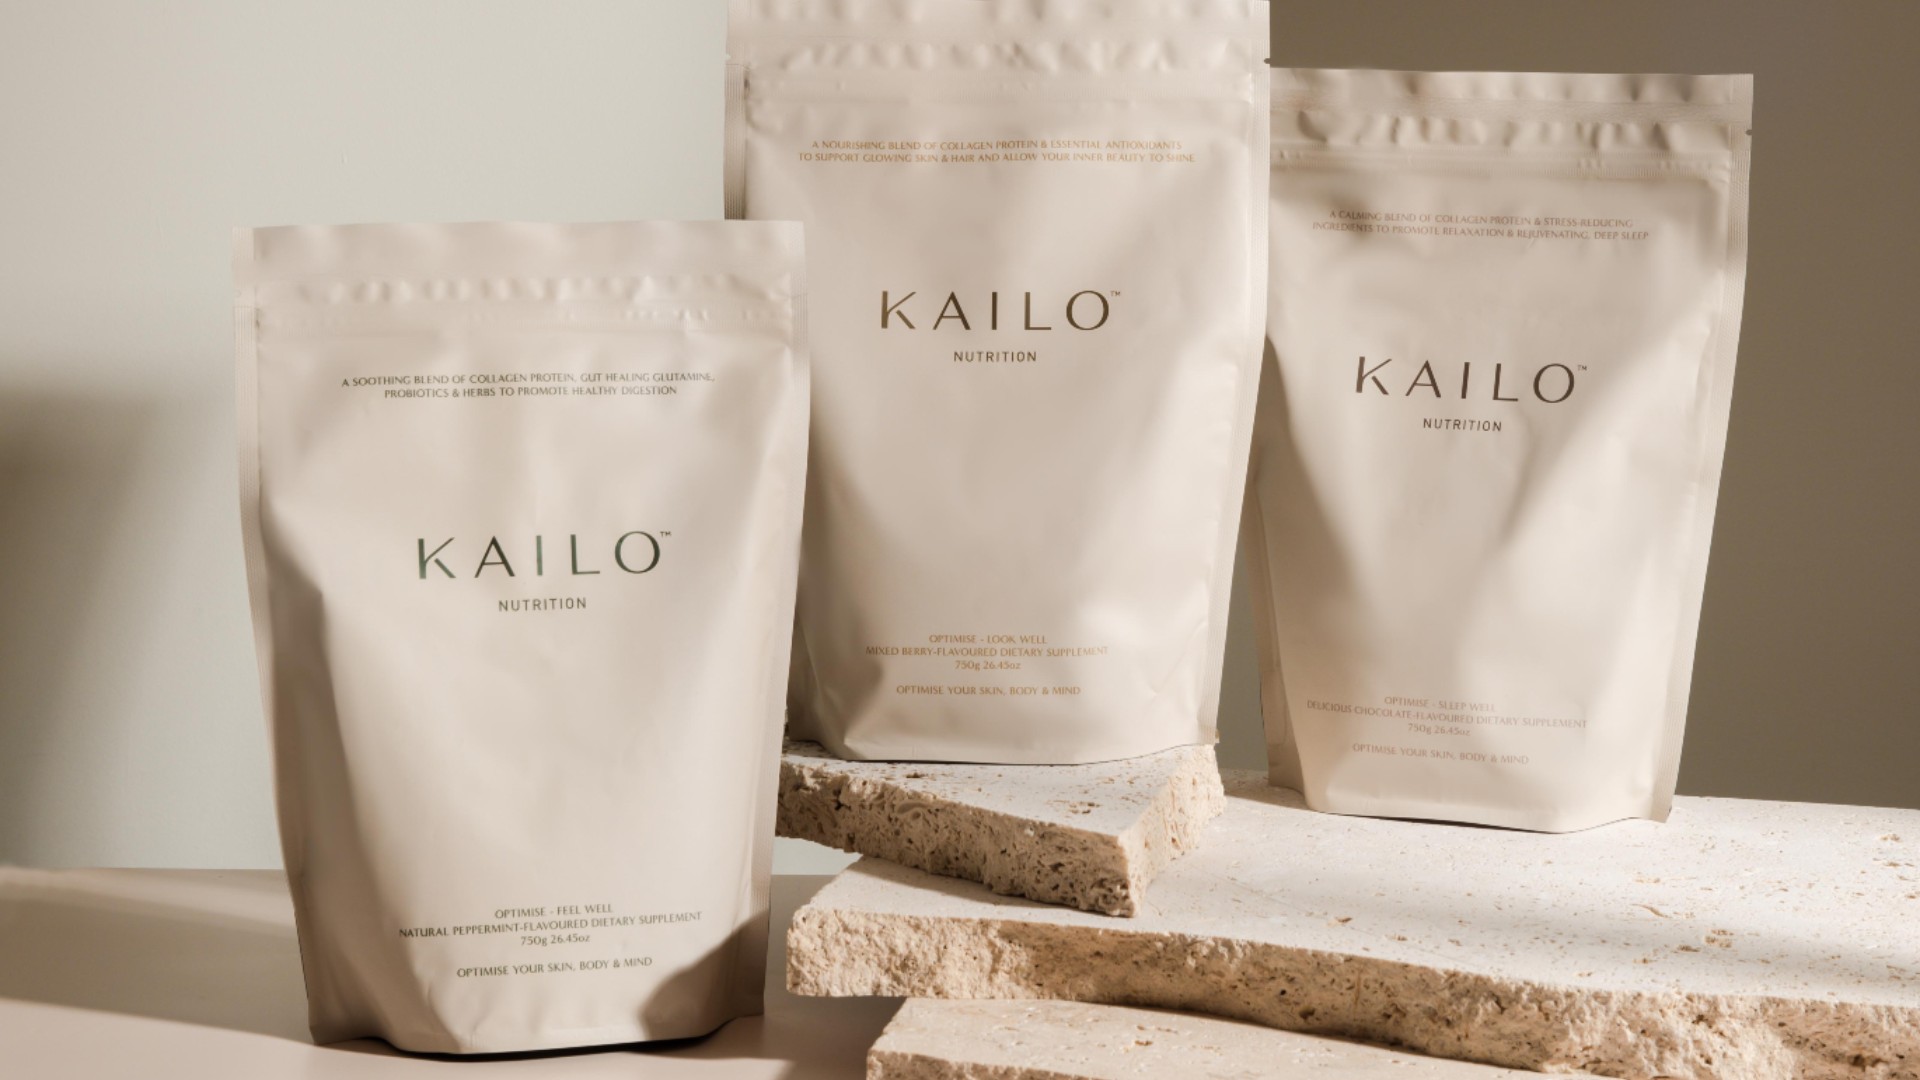 Kailo nutrition products